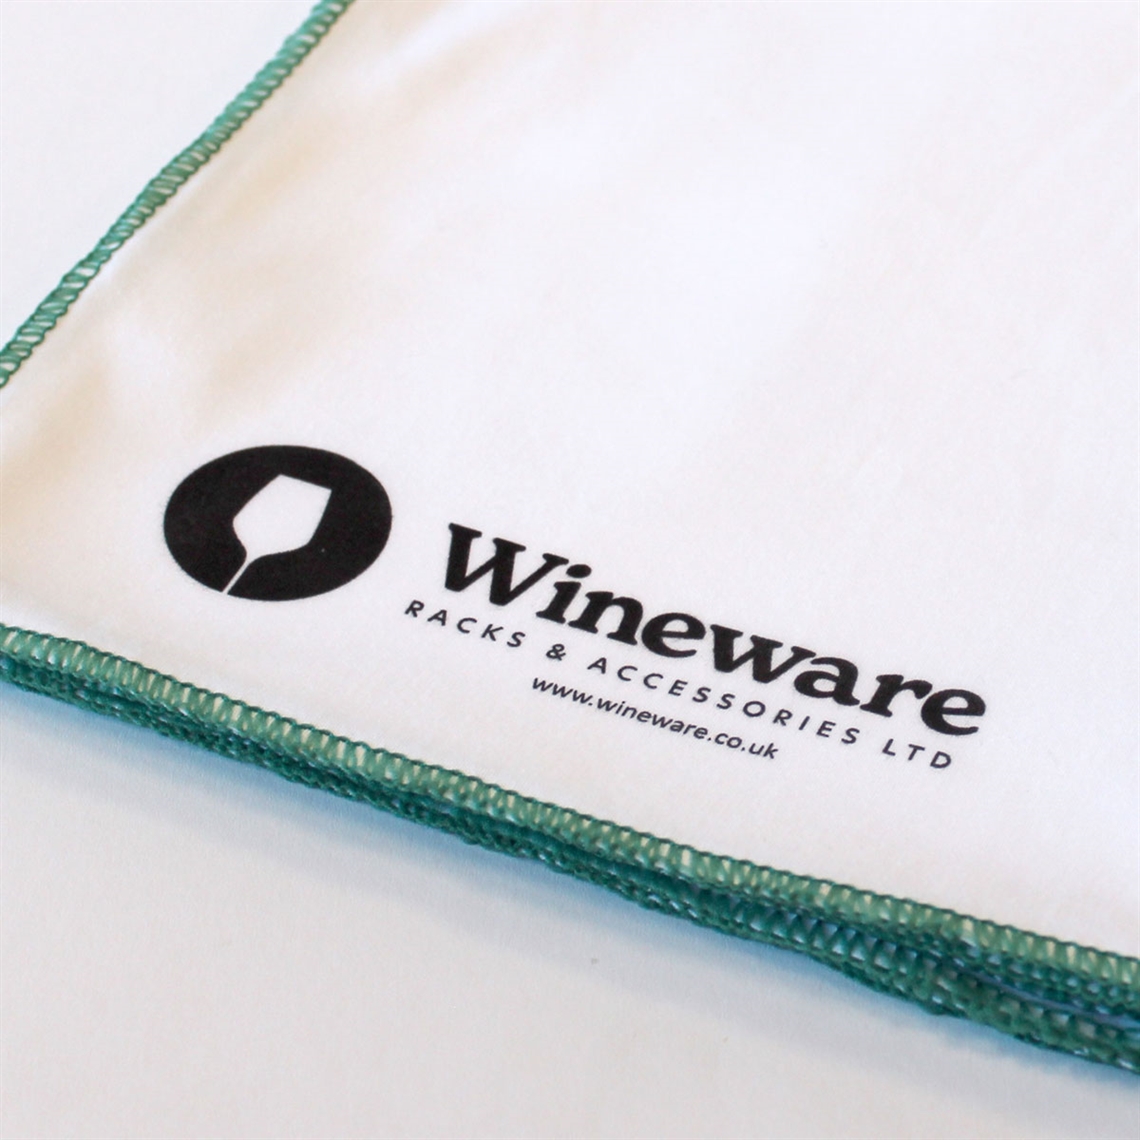 View more how to store homemade wine guide from our Wine Decanter Cleaning range